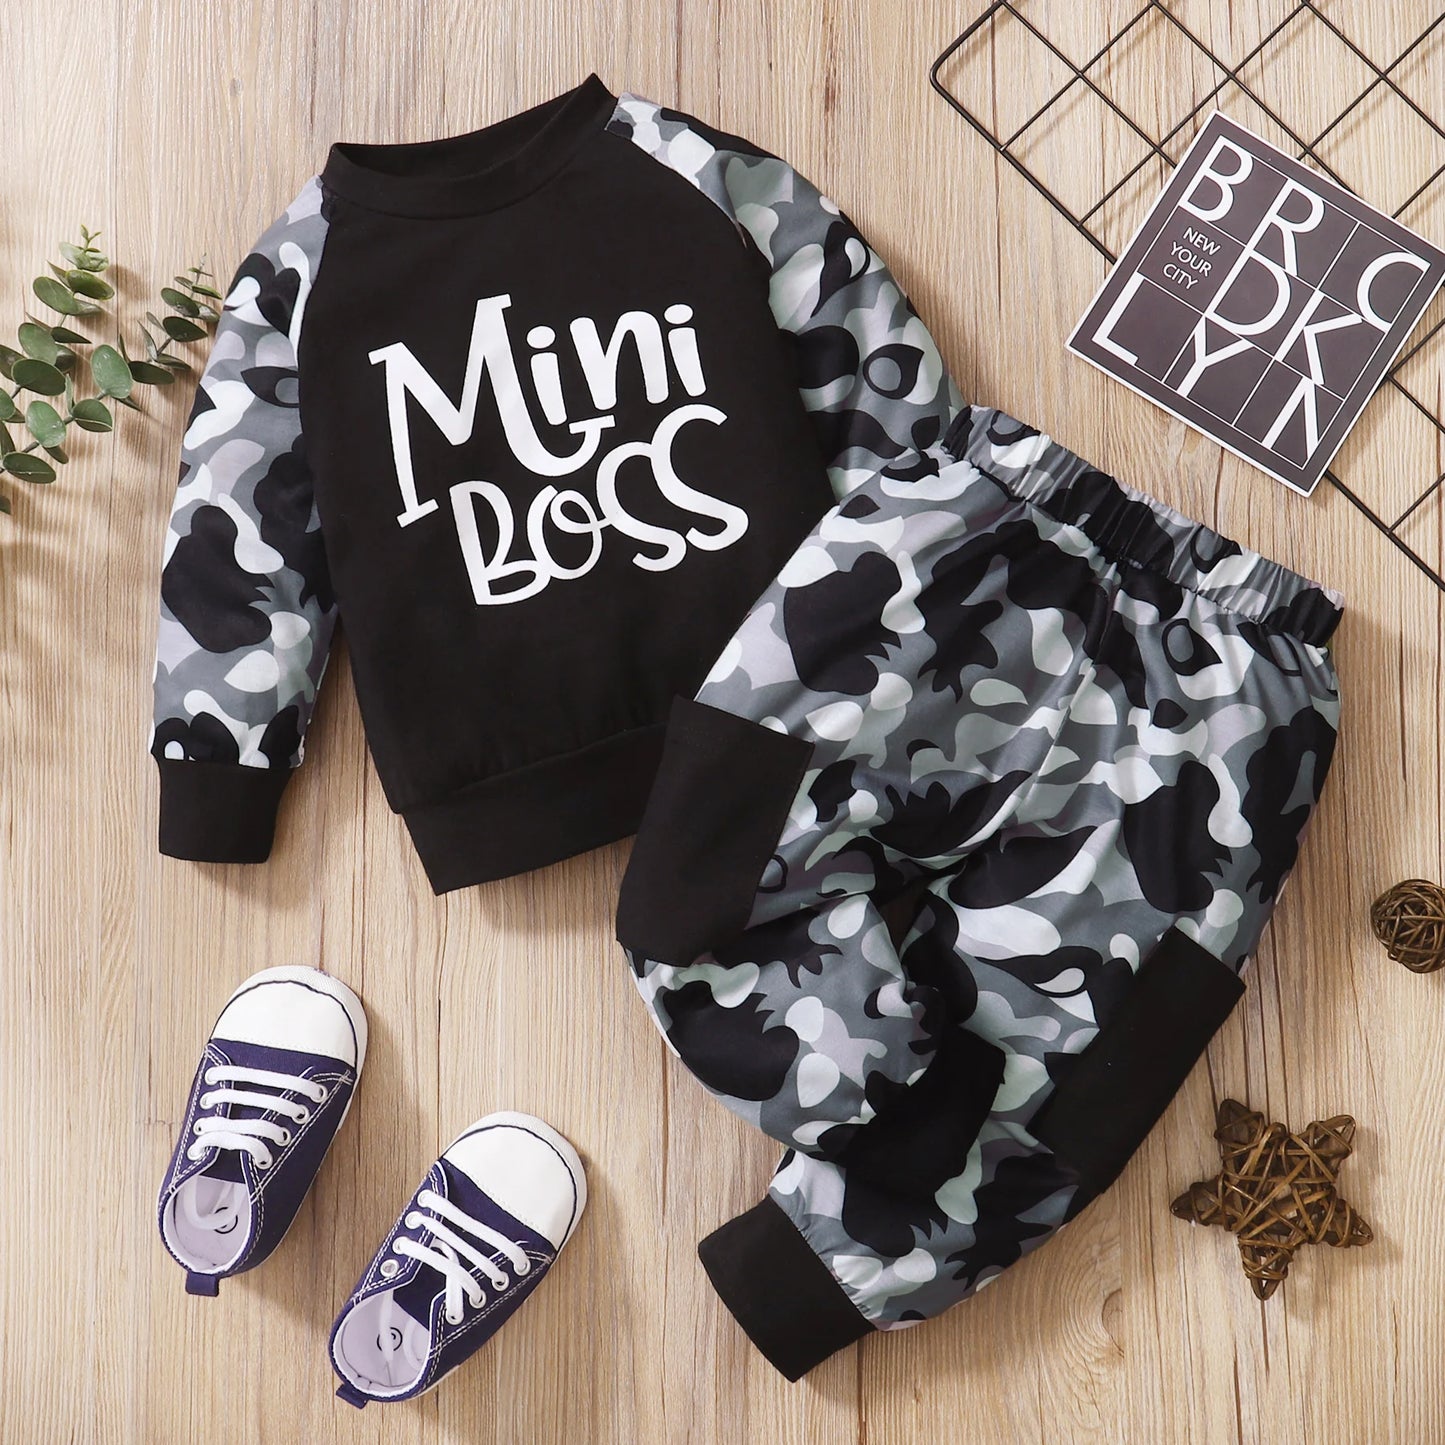 : Toddler Baby Boy Camouflage Sweatshirt Outfit - Long Sleeve Tops and Pants - 2pcs Fall Winter Set